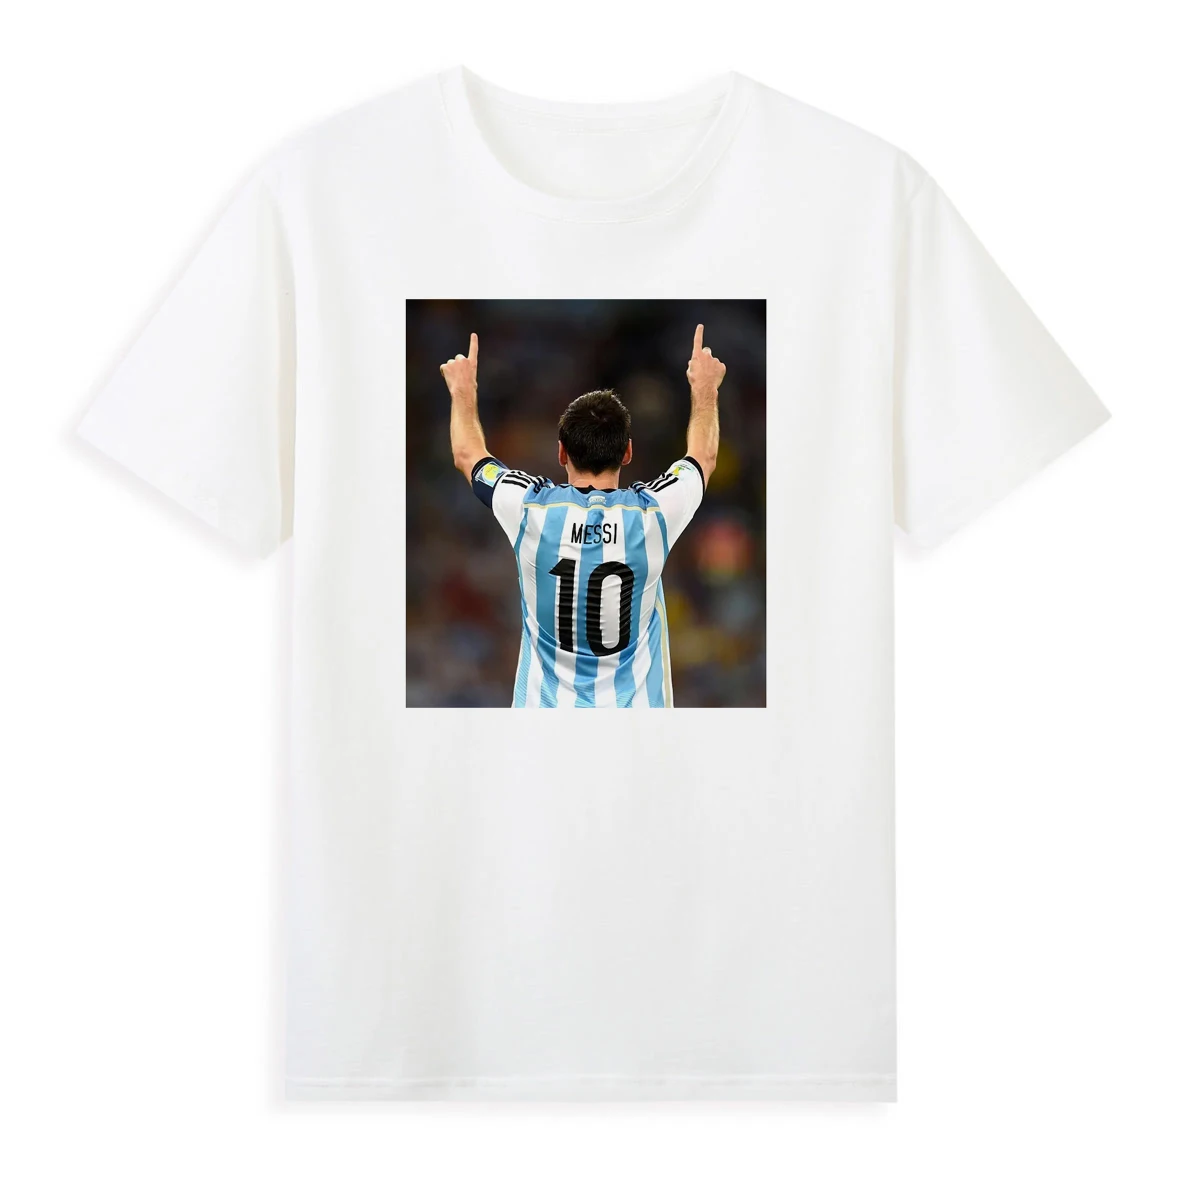 

BGtomato Lionel Messi tshirt New style Men's Clothing Brand new NO.10 Tops & Tees comfortable cotton T-Shirts B1-17